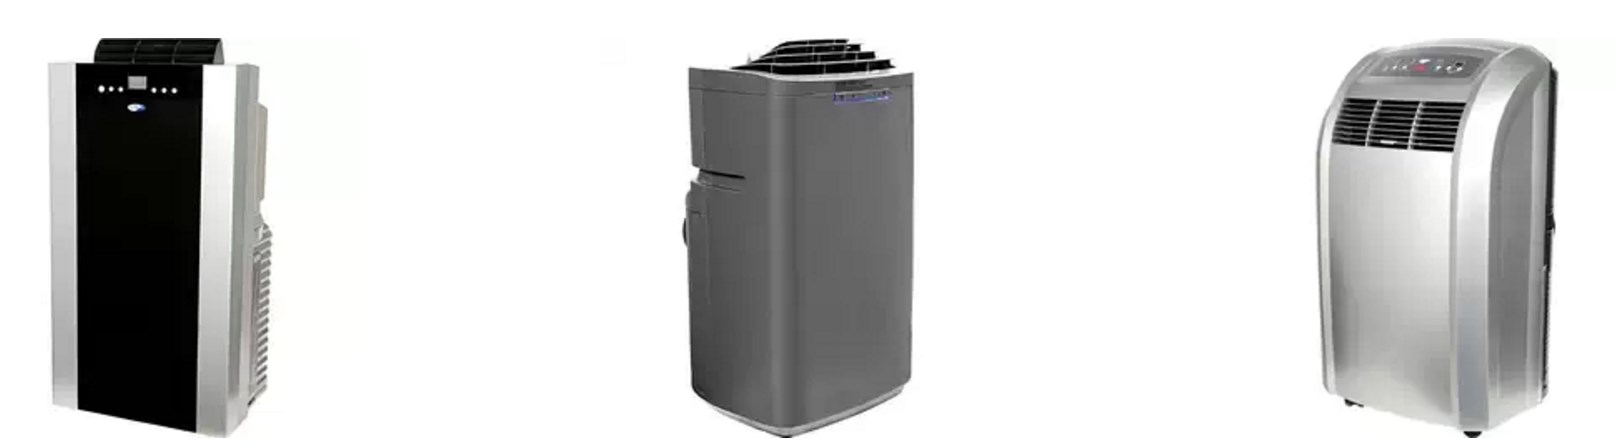 Save up to 46% on Whynter portable air conditioning units